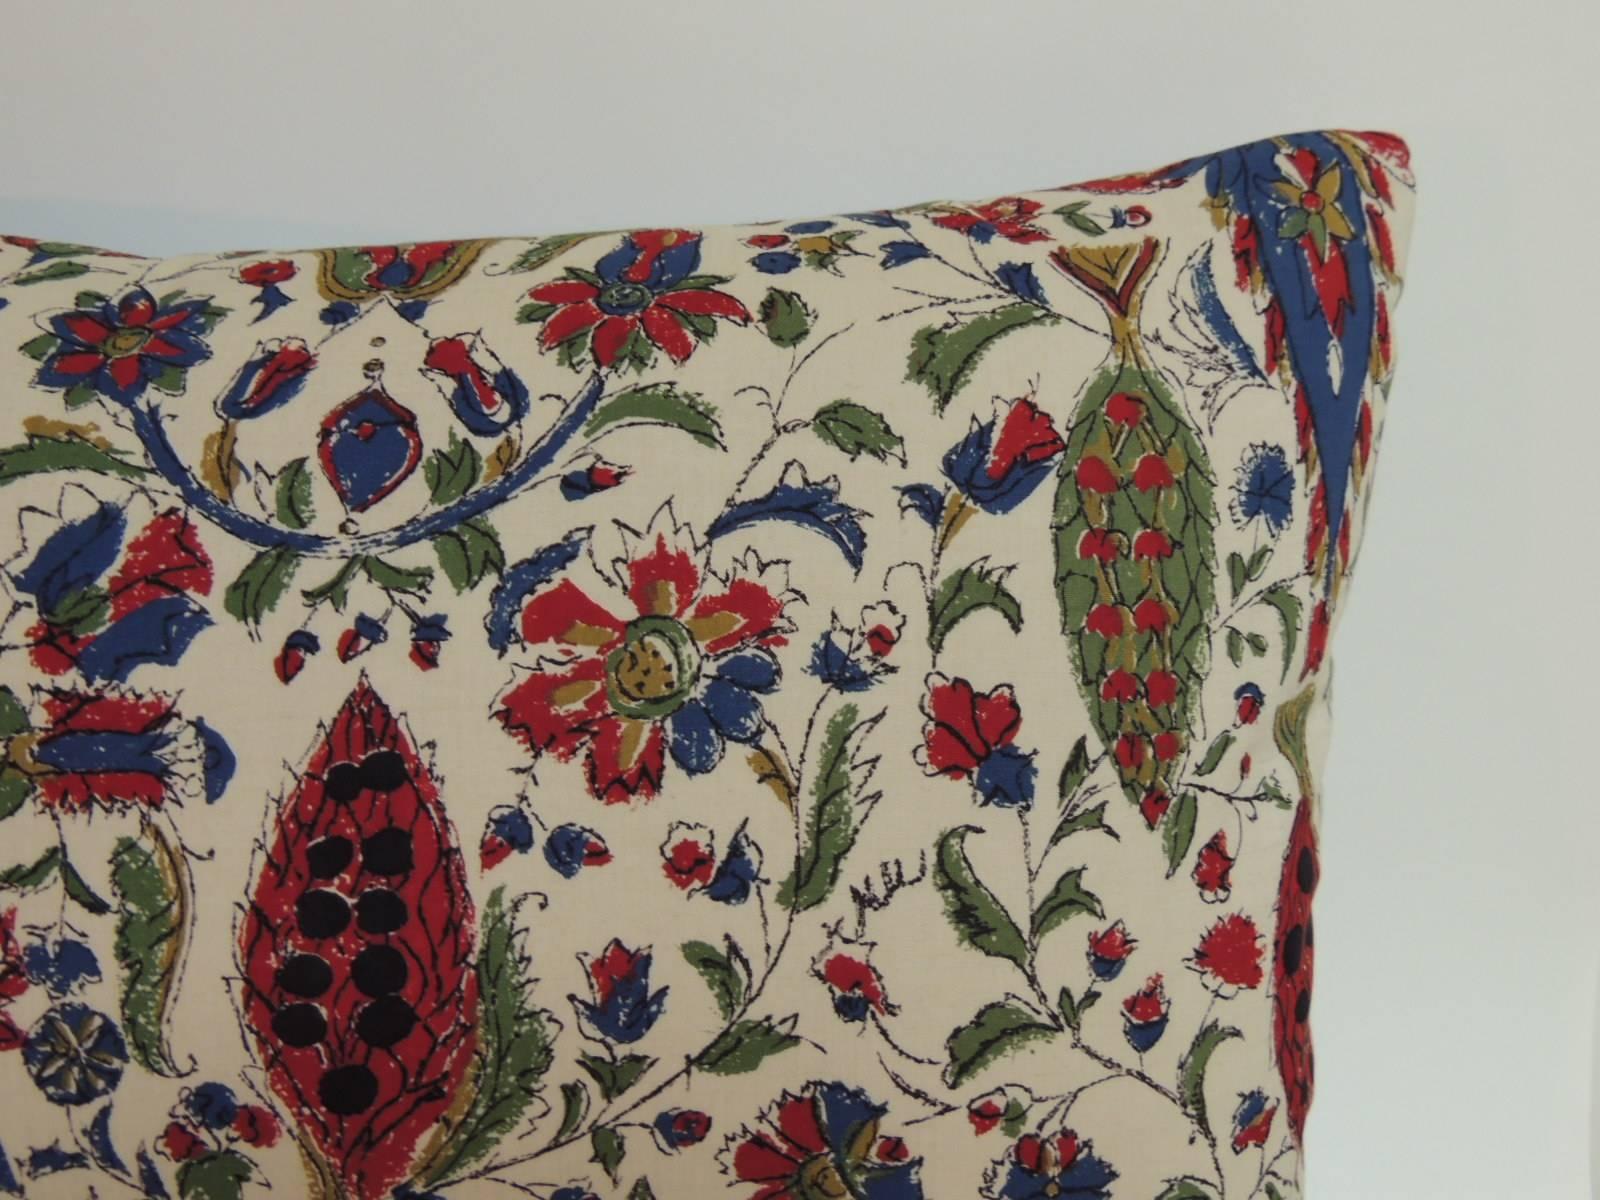 Offered by the Antique Textiles Galleries:
Pair of 1980s vintage cotton multicolor floral on paisley pattern decorative pillows in shades of red, royal blue, tan, green finished on an ecru background with basket weave wedge wood blue linen backing.